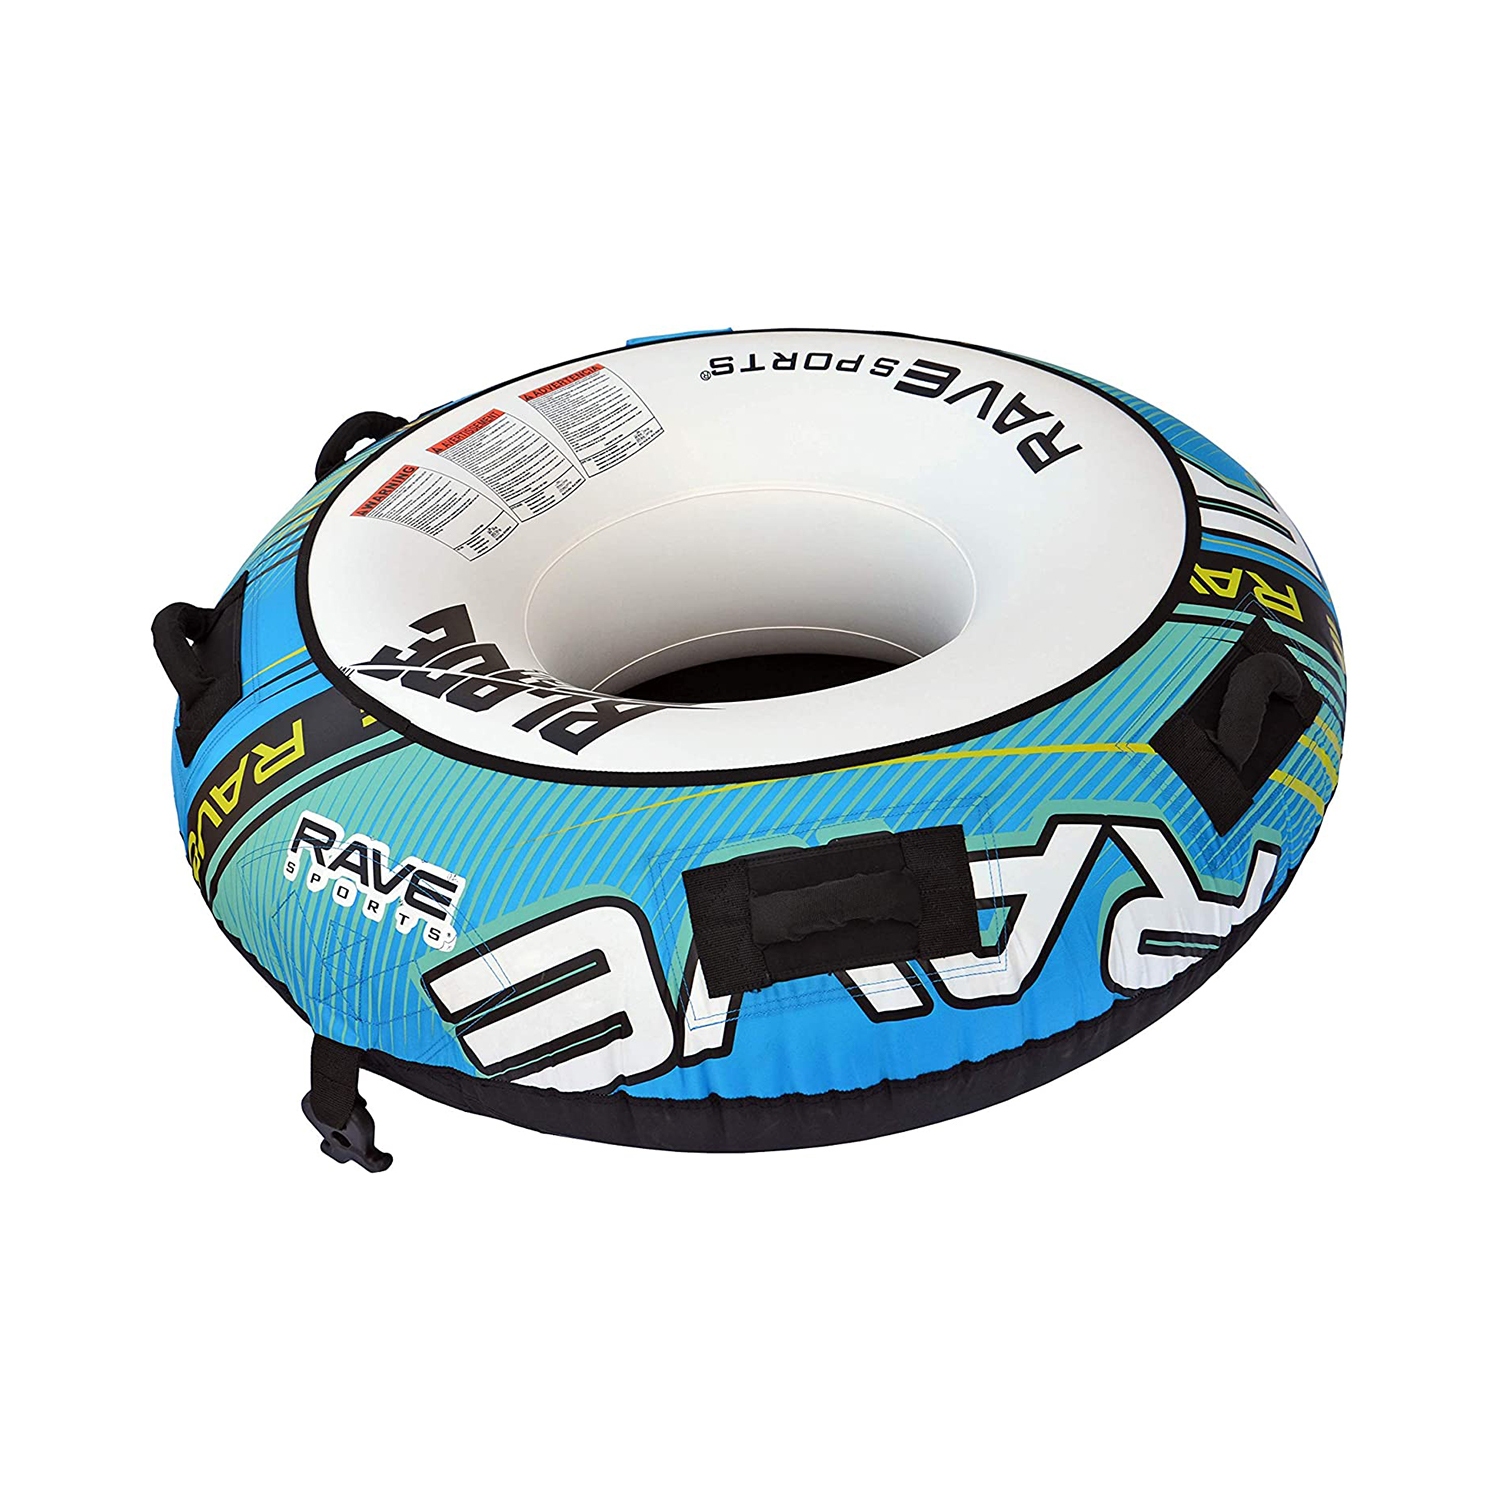 Blade 54 Inch 1 Rider Inflatable Boat Towable Water Ski Tube w/ 4 Handles, Blue - image 2 of 6